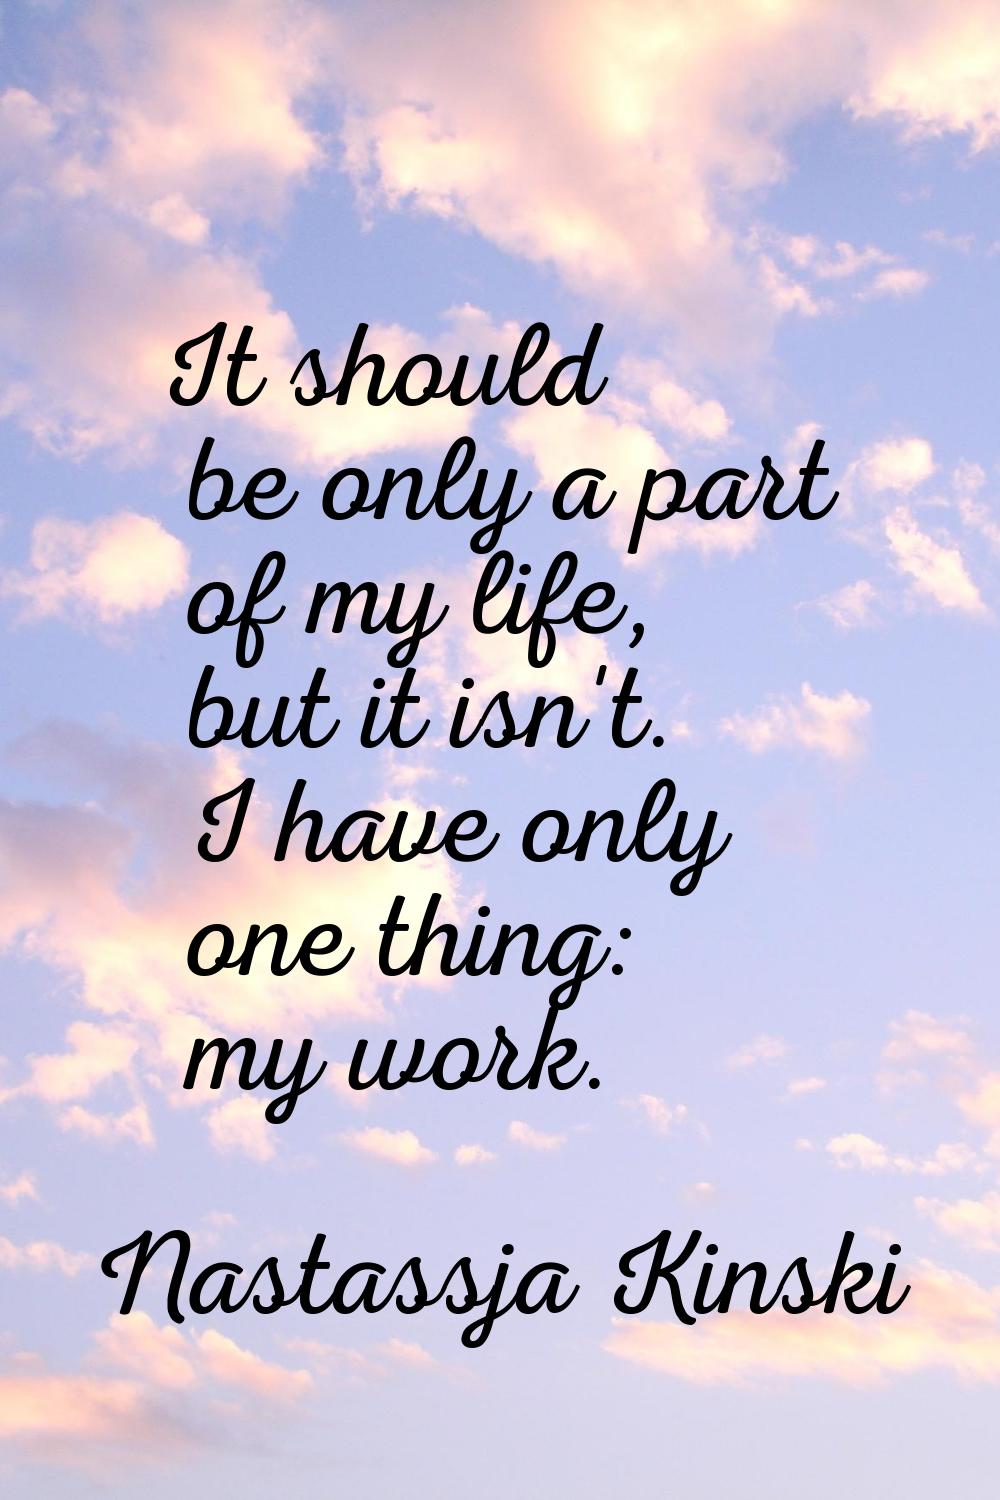 It should be only a part of my life, but it isn't. I have only one thing: my work.